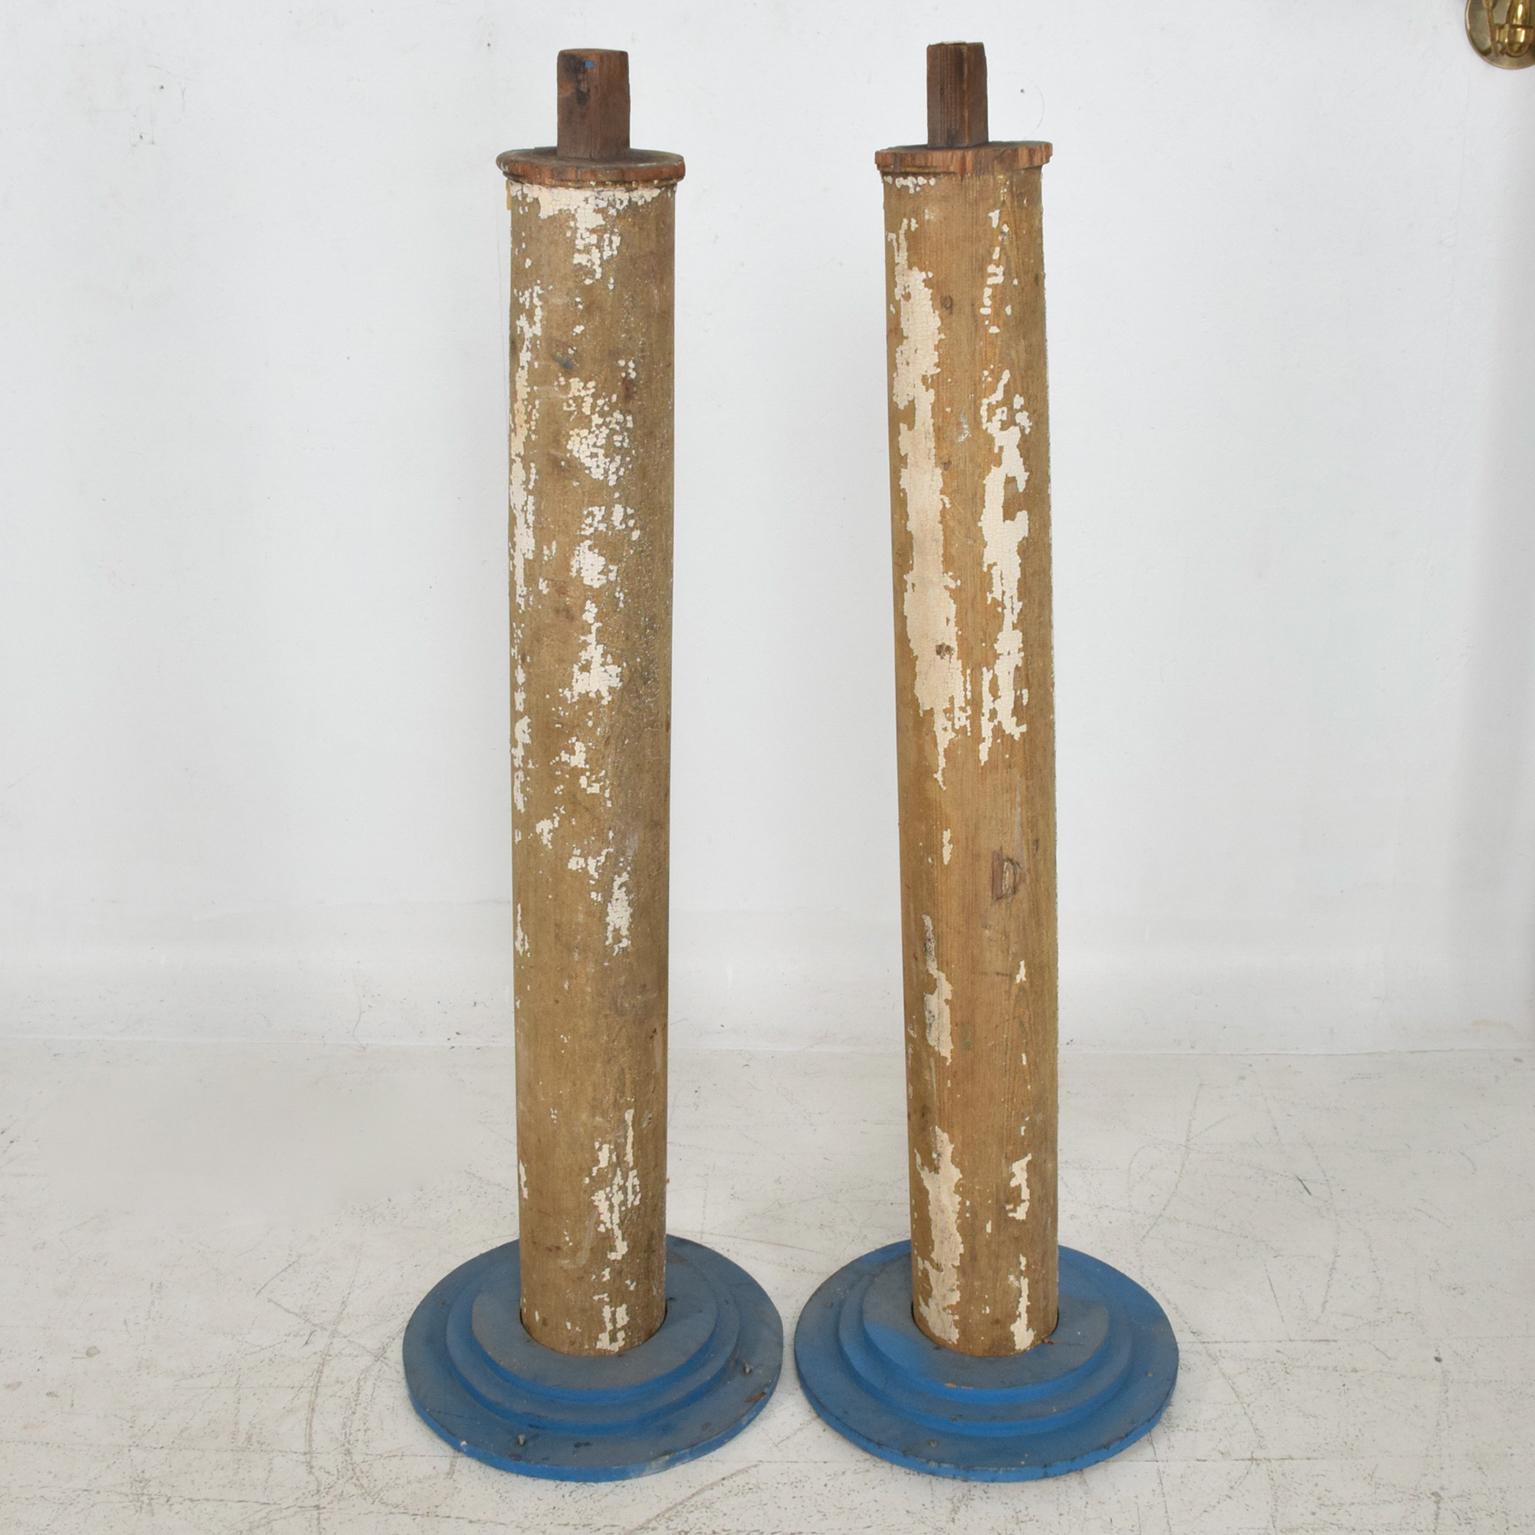 Patinated Set of Four Wood Architectural Wood Columns